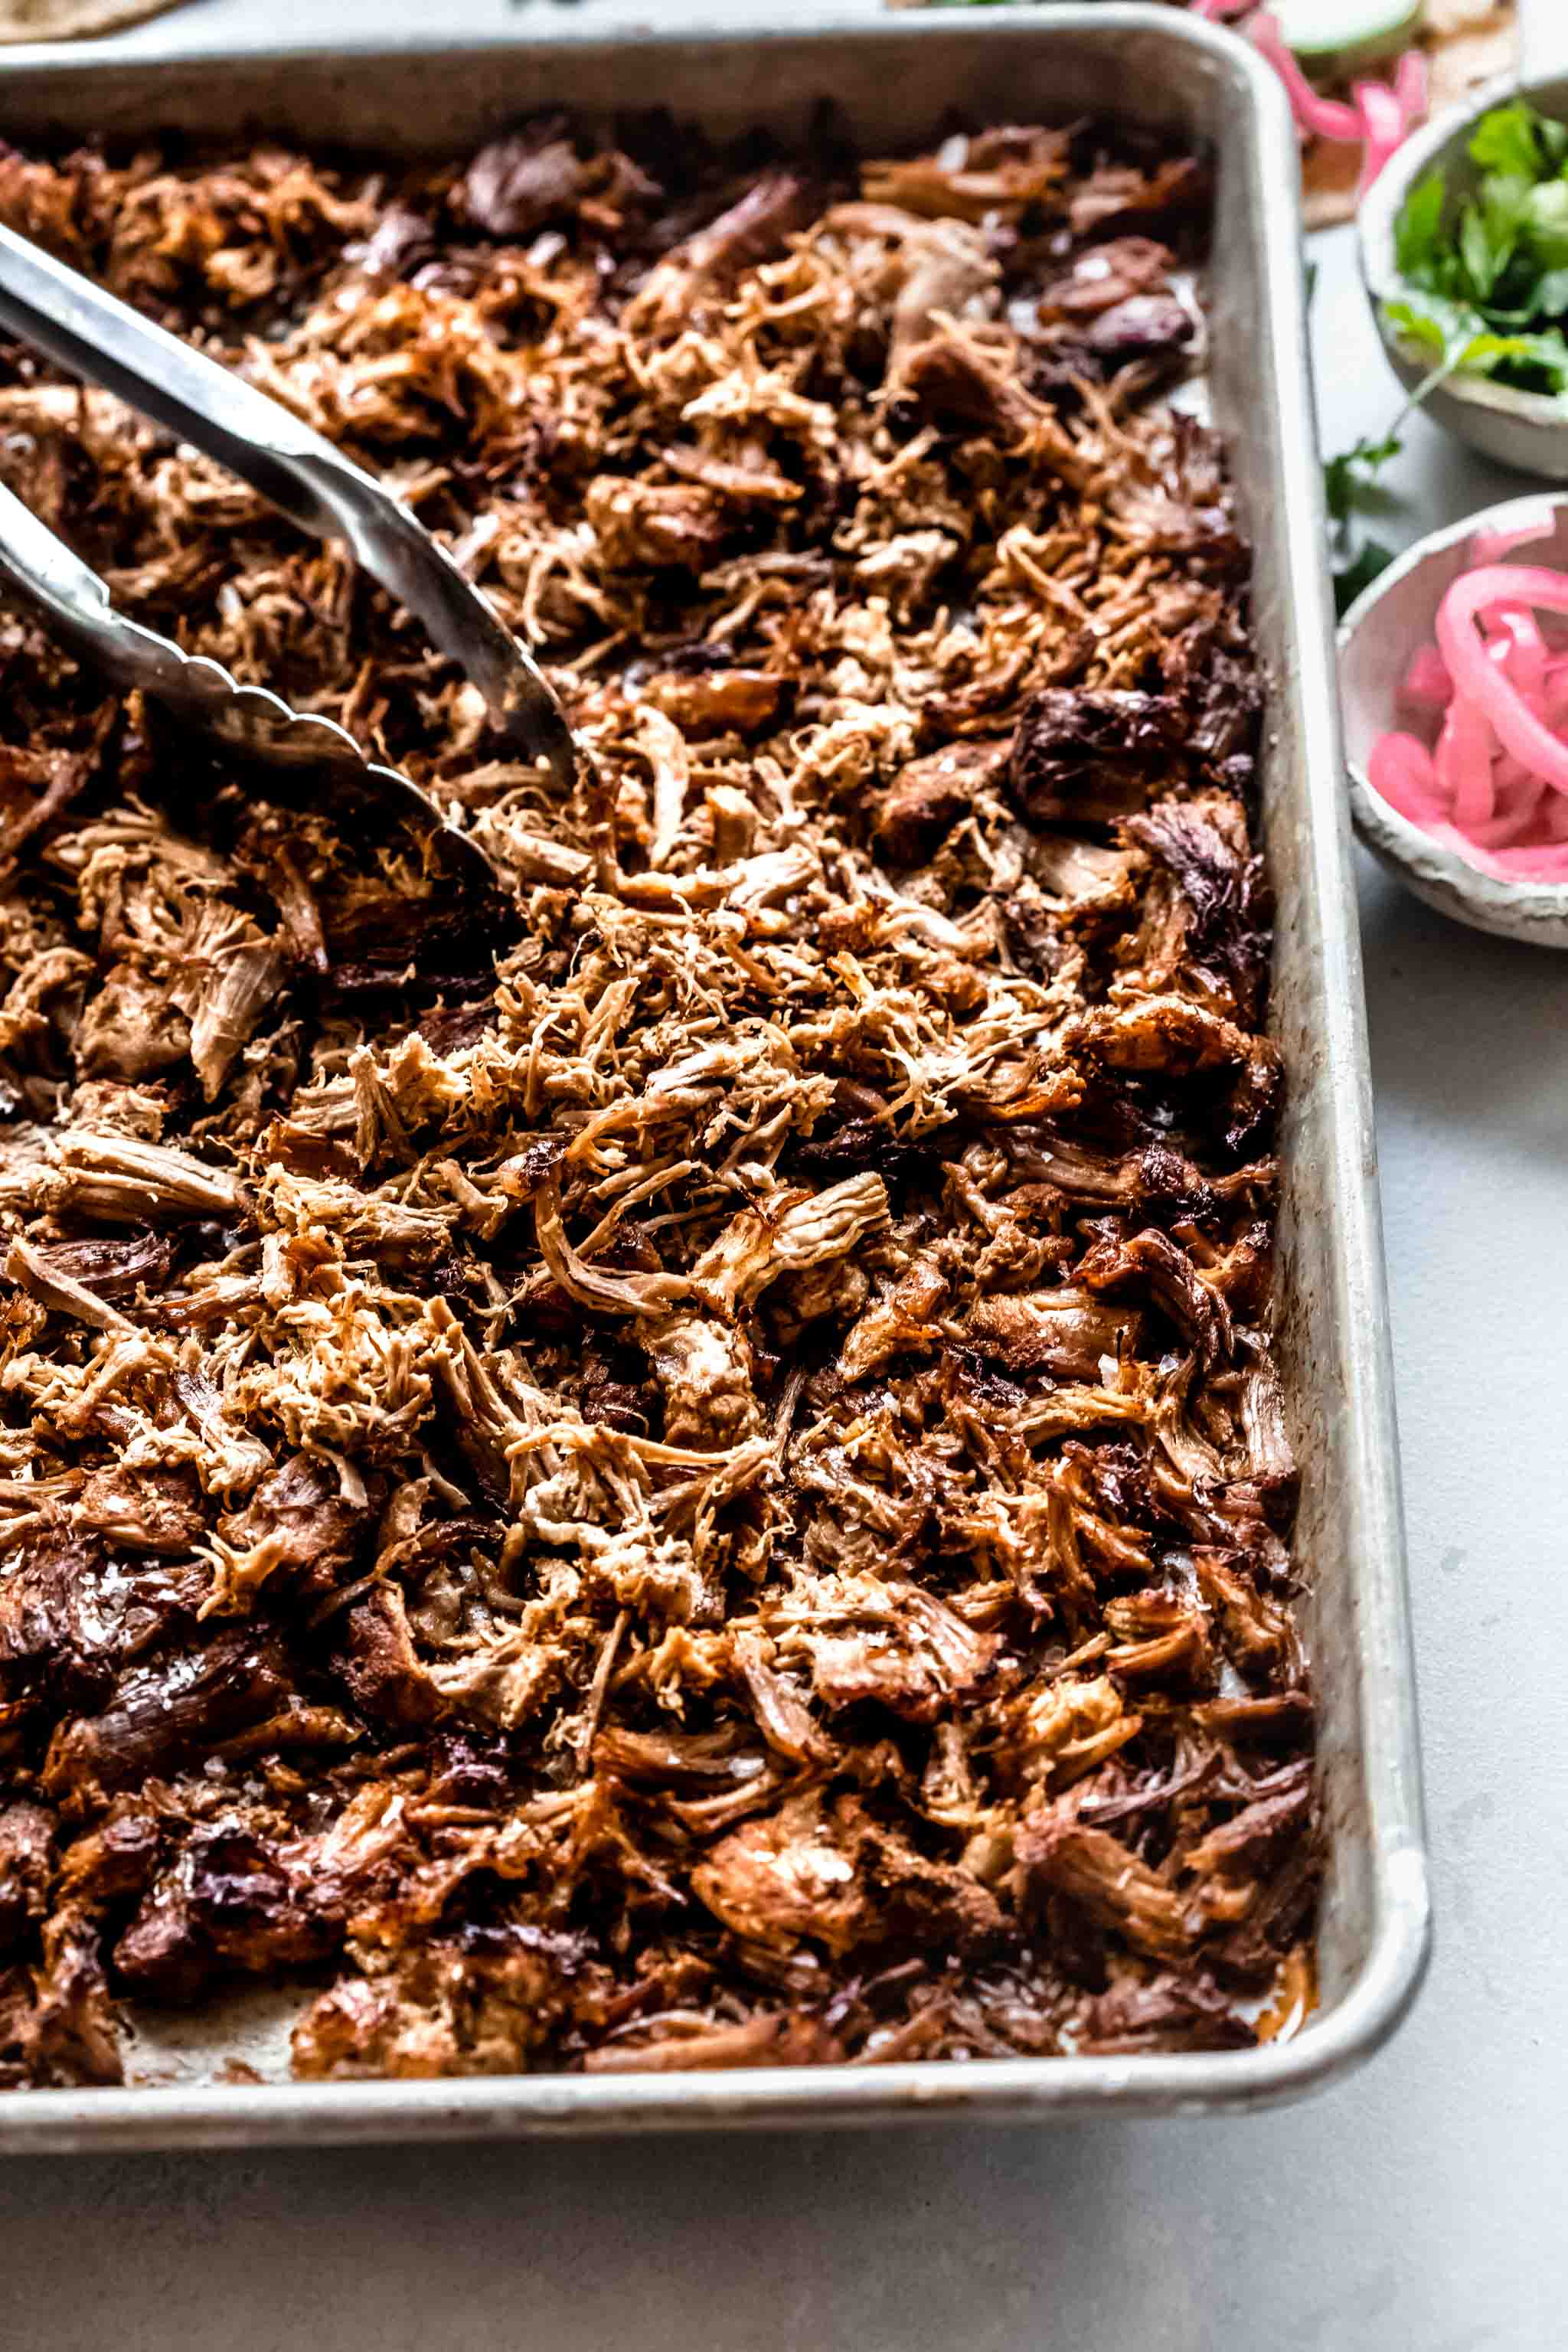 Carnitas on baking sheet after broiling in oven.